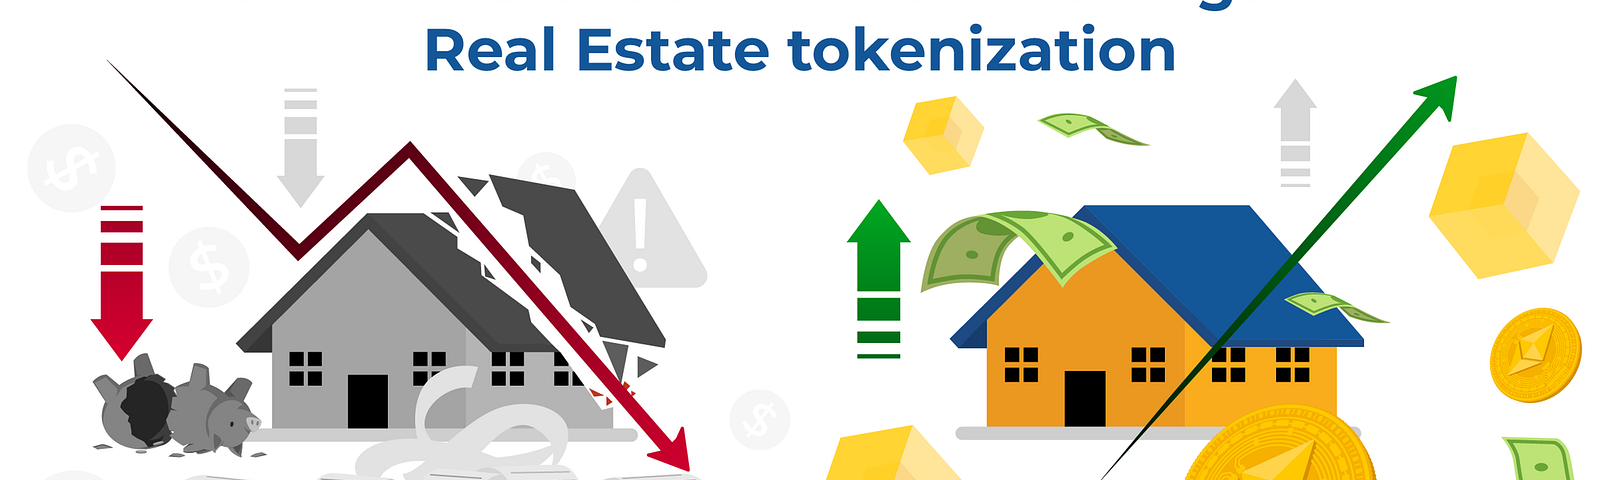 Real Estate crisis and its advantages for Real Estate tokenization